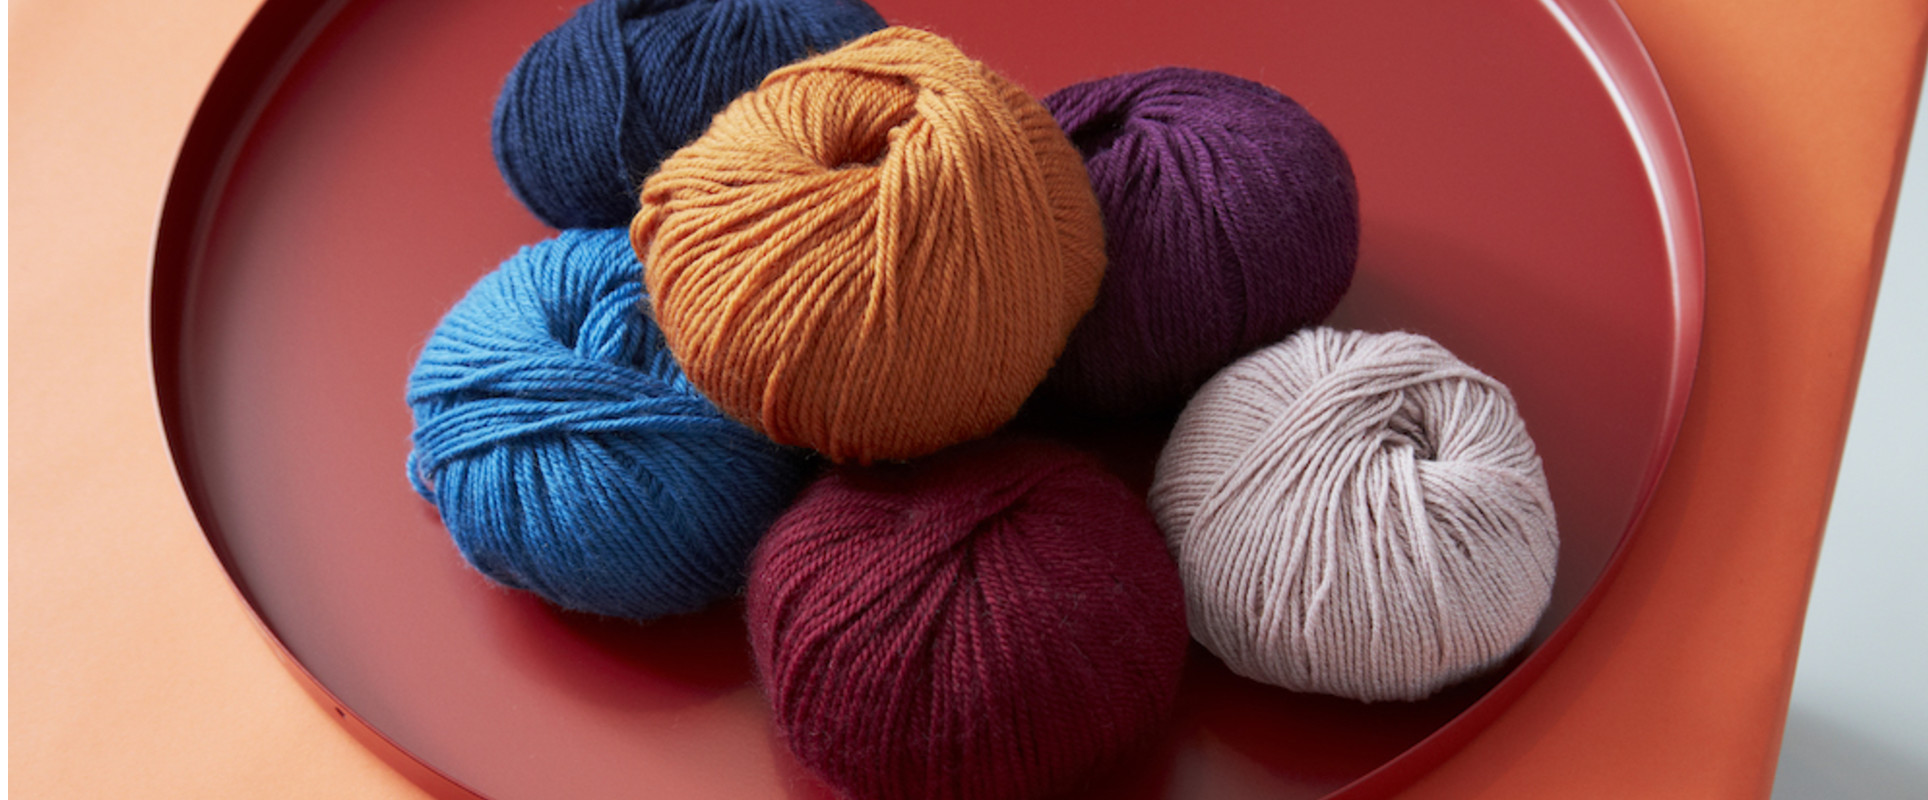 Types of Yarn Explained | Buying Guide | LoveCrafts